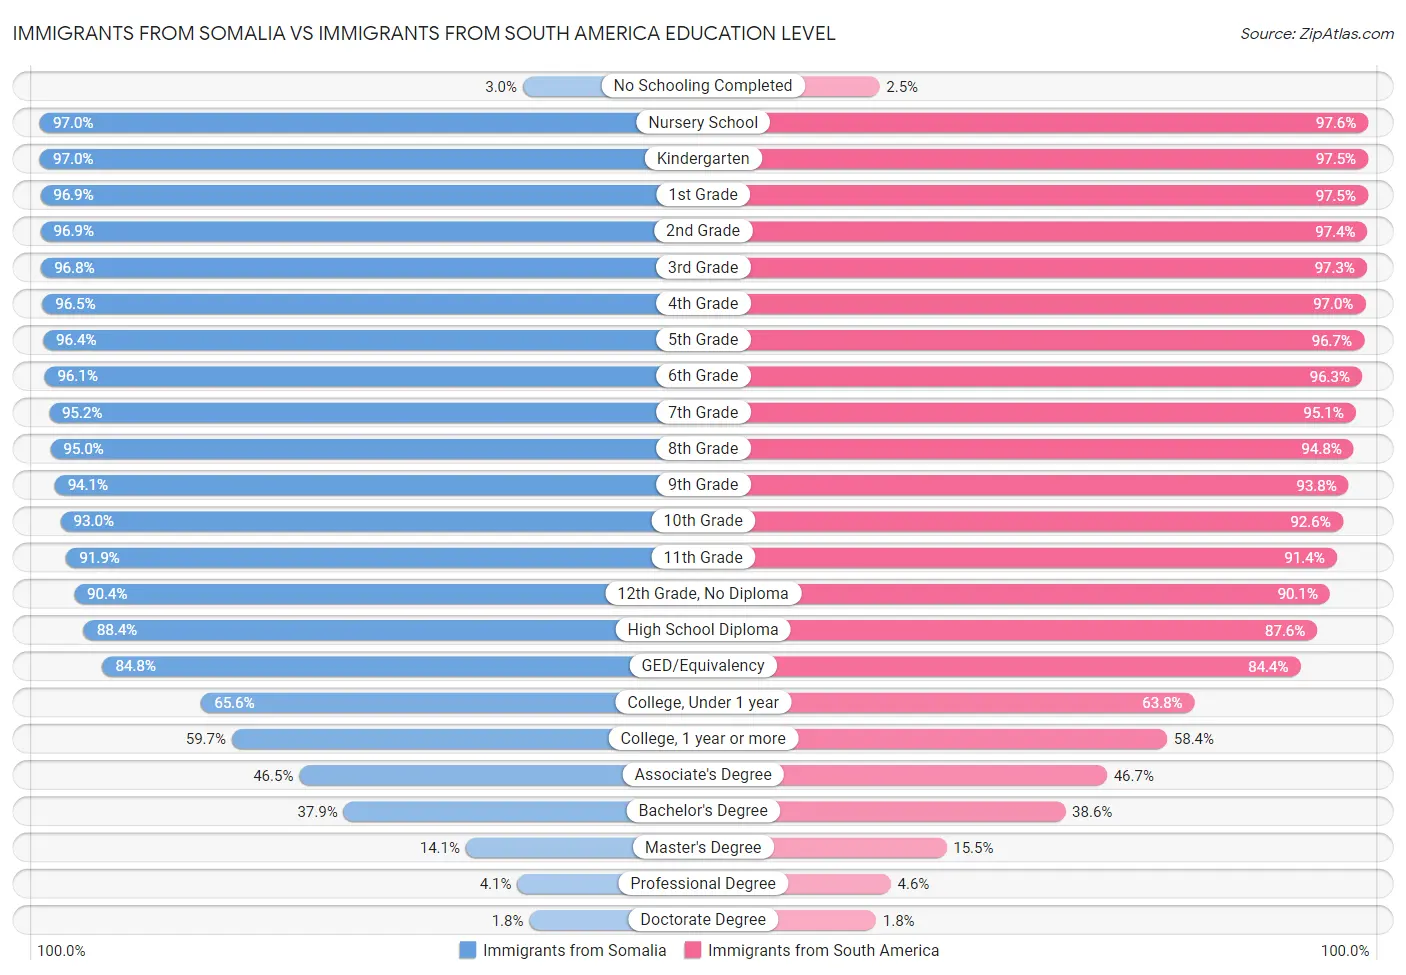 Immigrants from Somalia vs Immigrants from South America Education Level